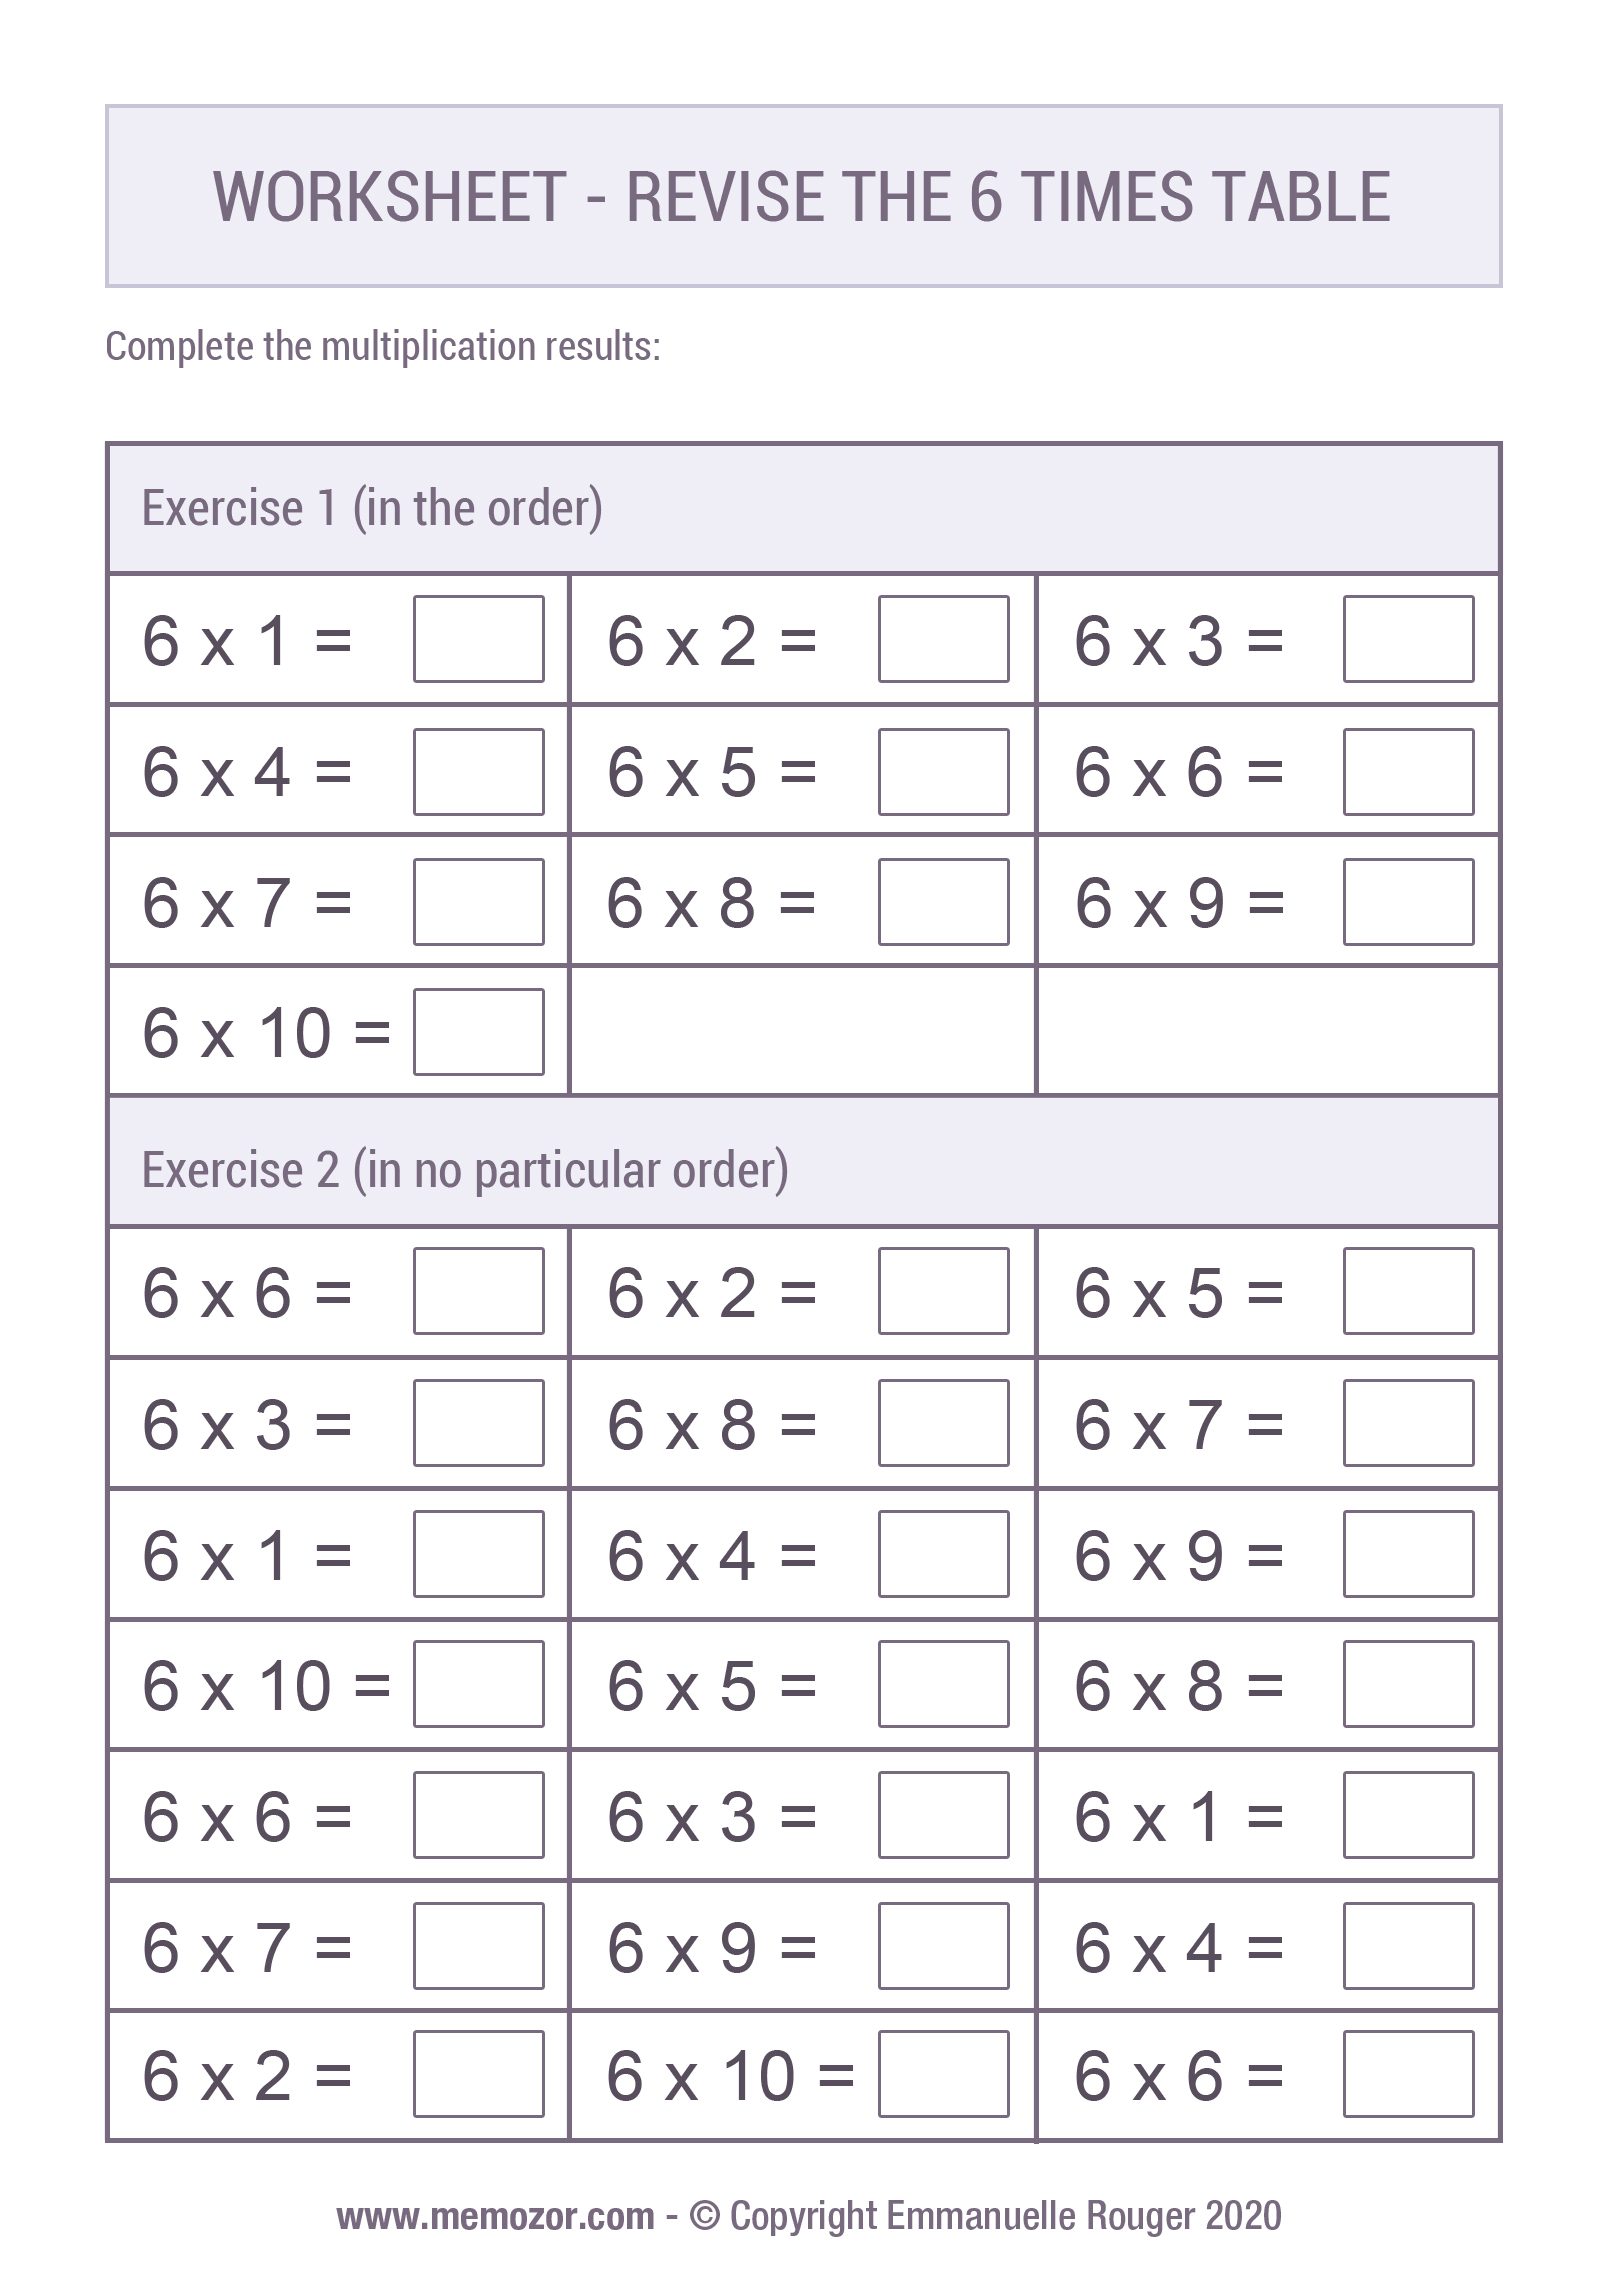 Worksheet To Print Revise The 6 Times Table Memozor